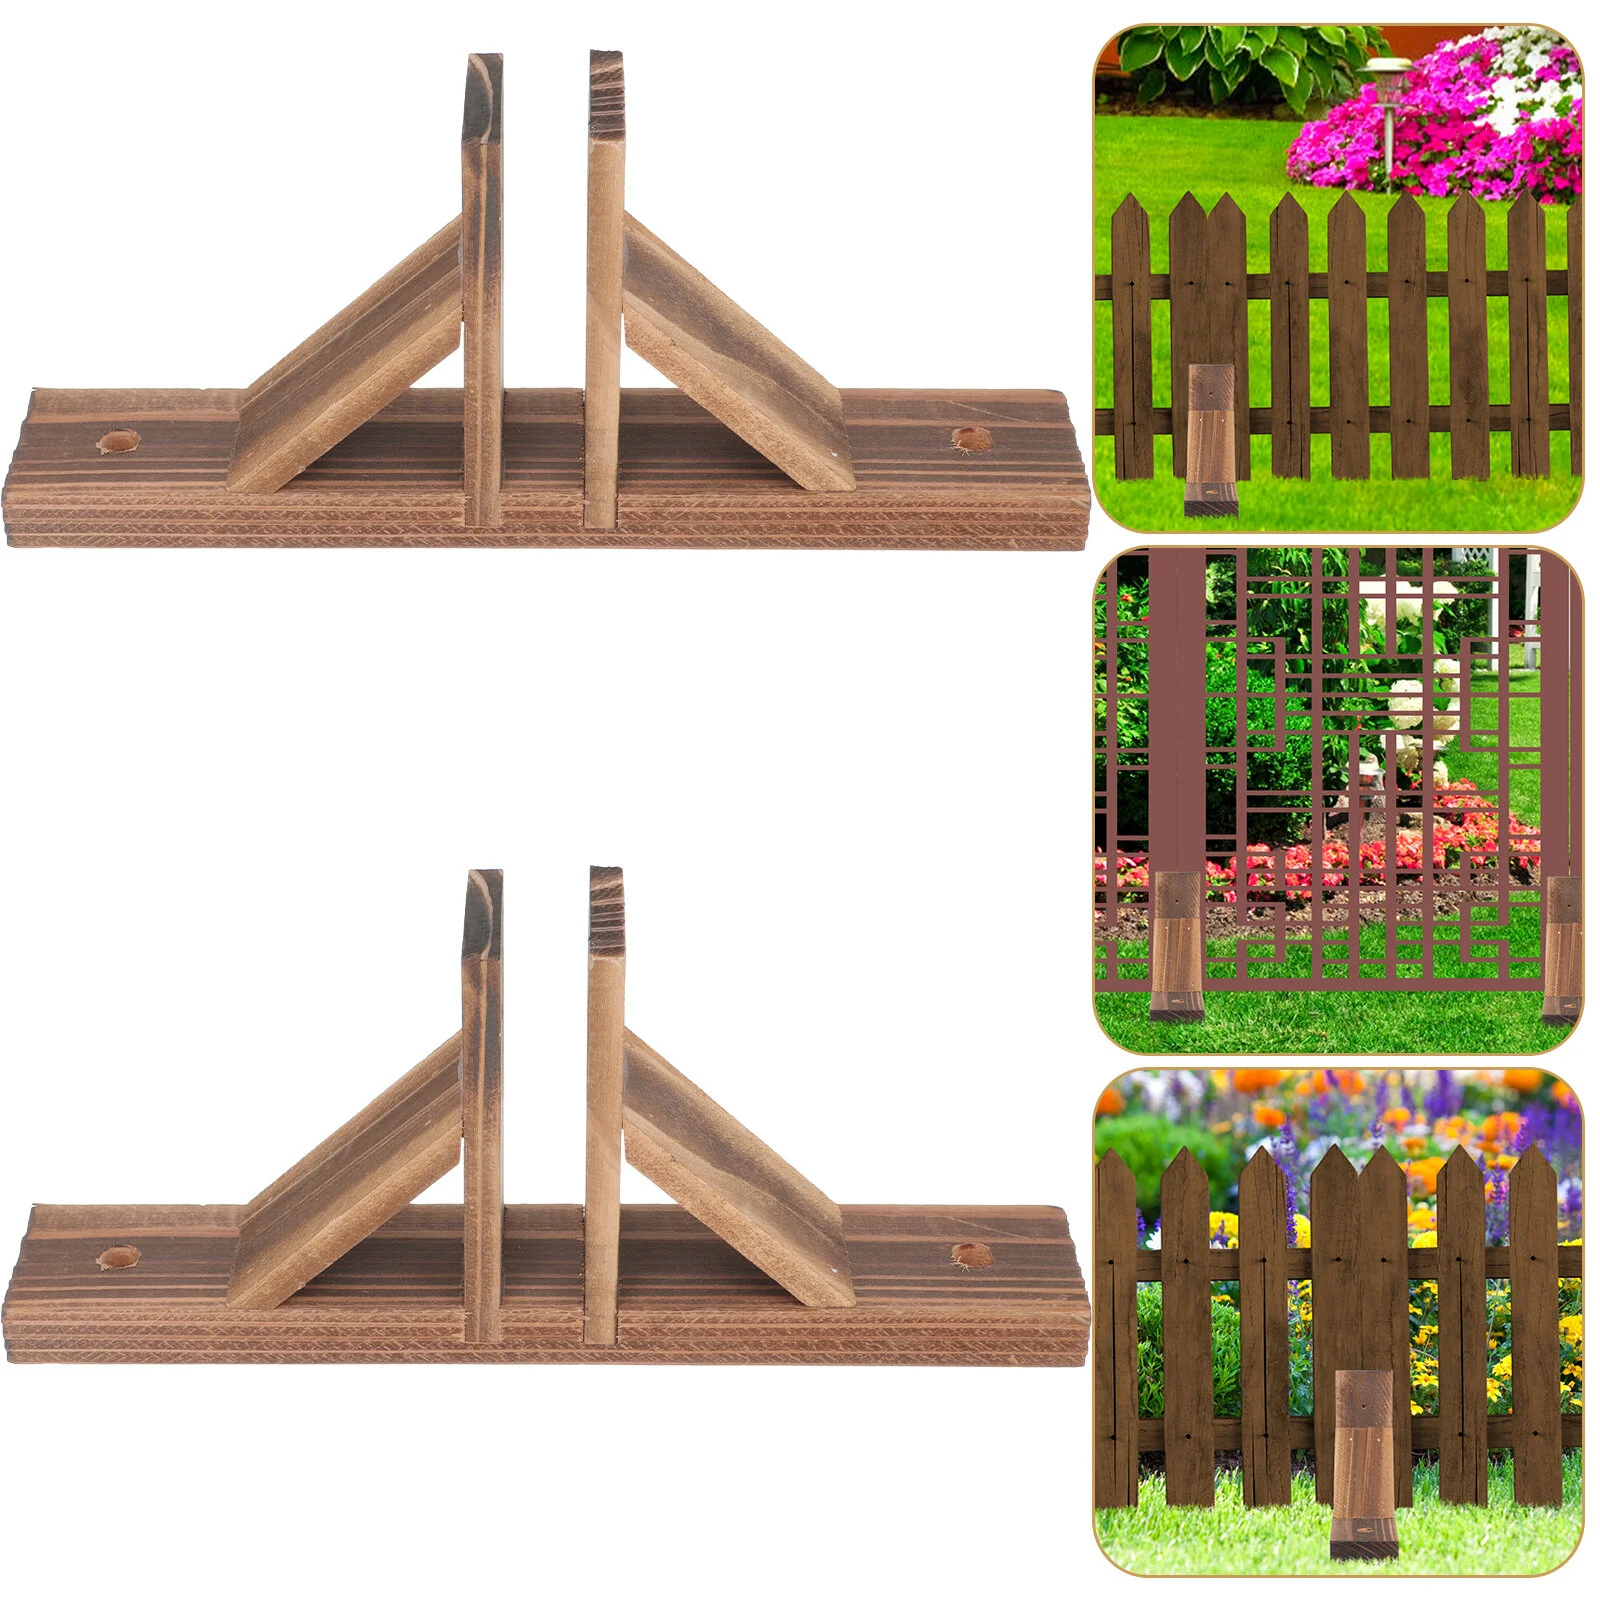 

2 Pcs Pet Fence Indoor Small Base Support Component Wood Kit Garden Holder Wooden Durable Fences Set Baby Yard Stand